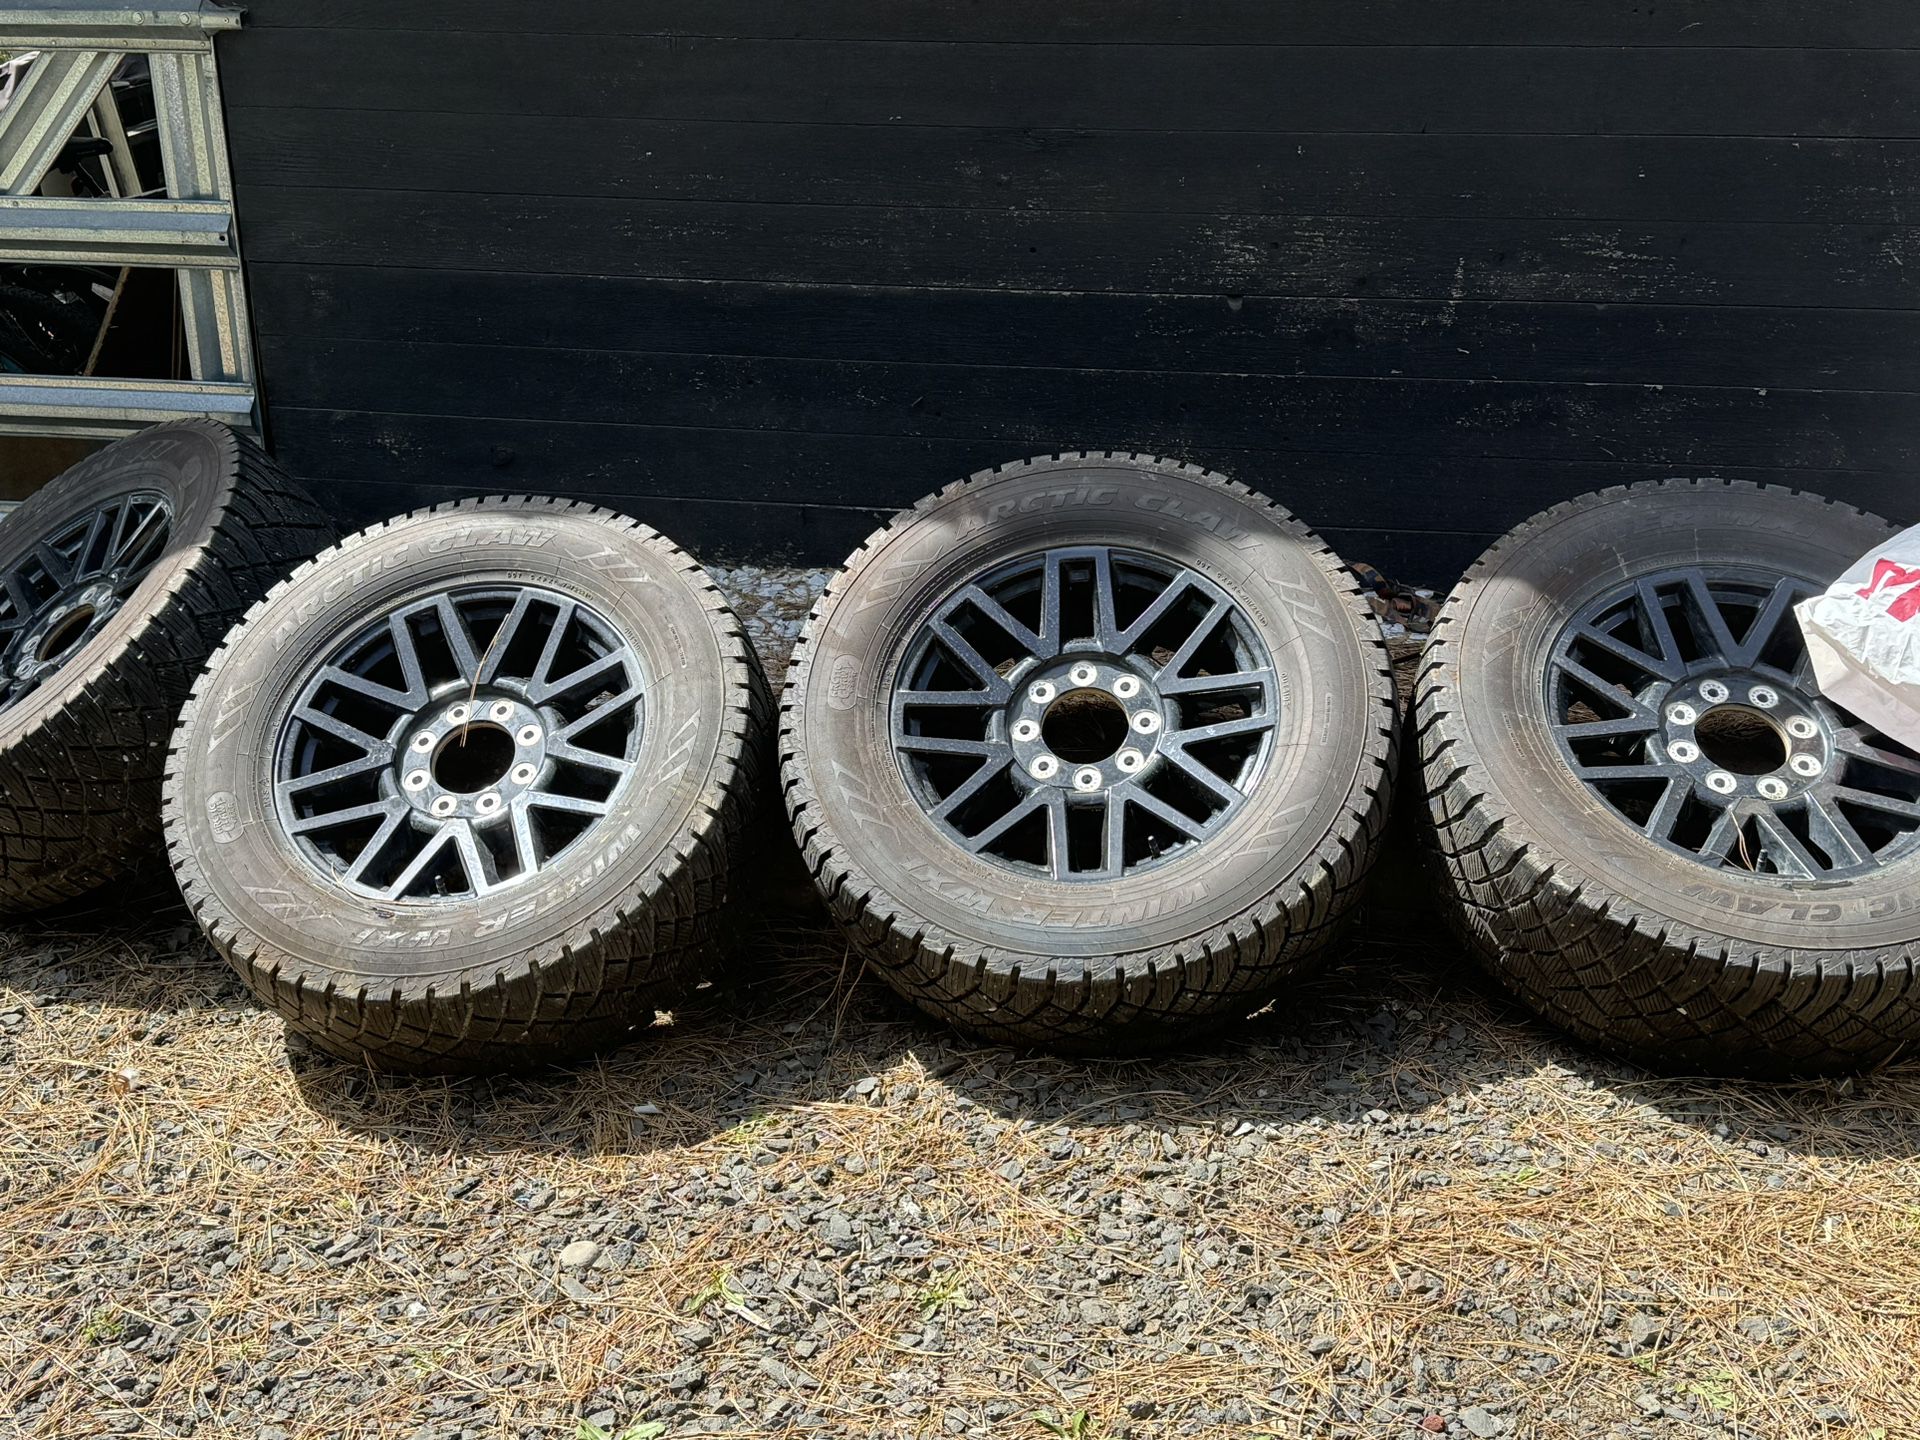 Stock Ford Superduty OEM black rims with tires